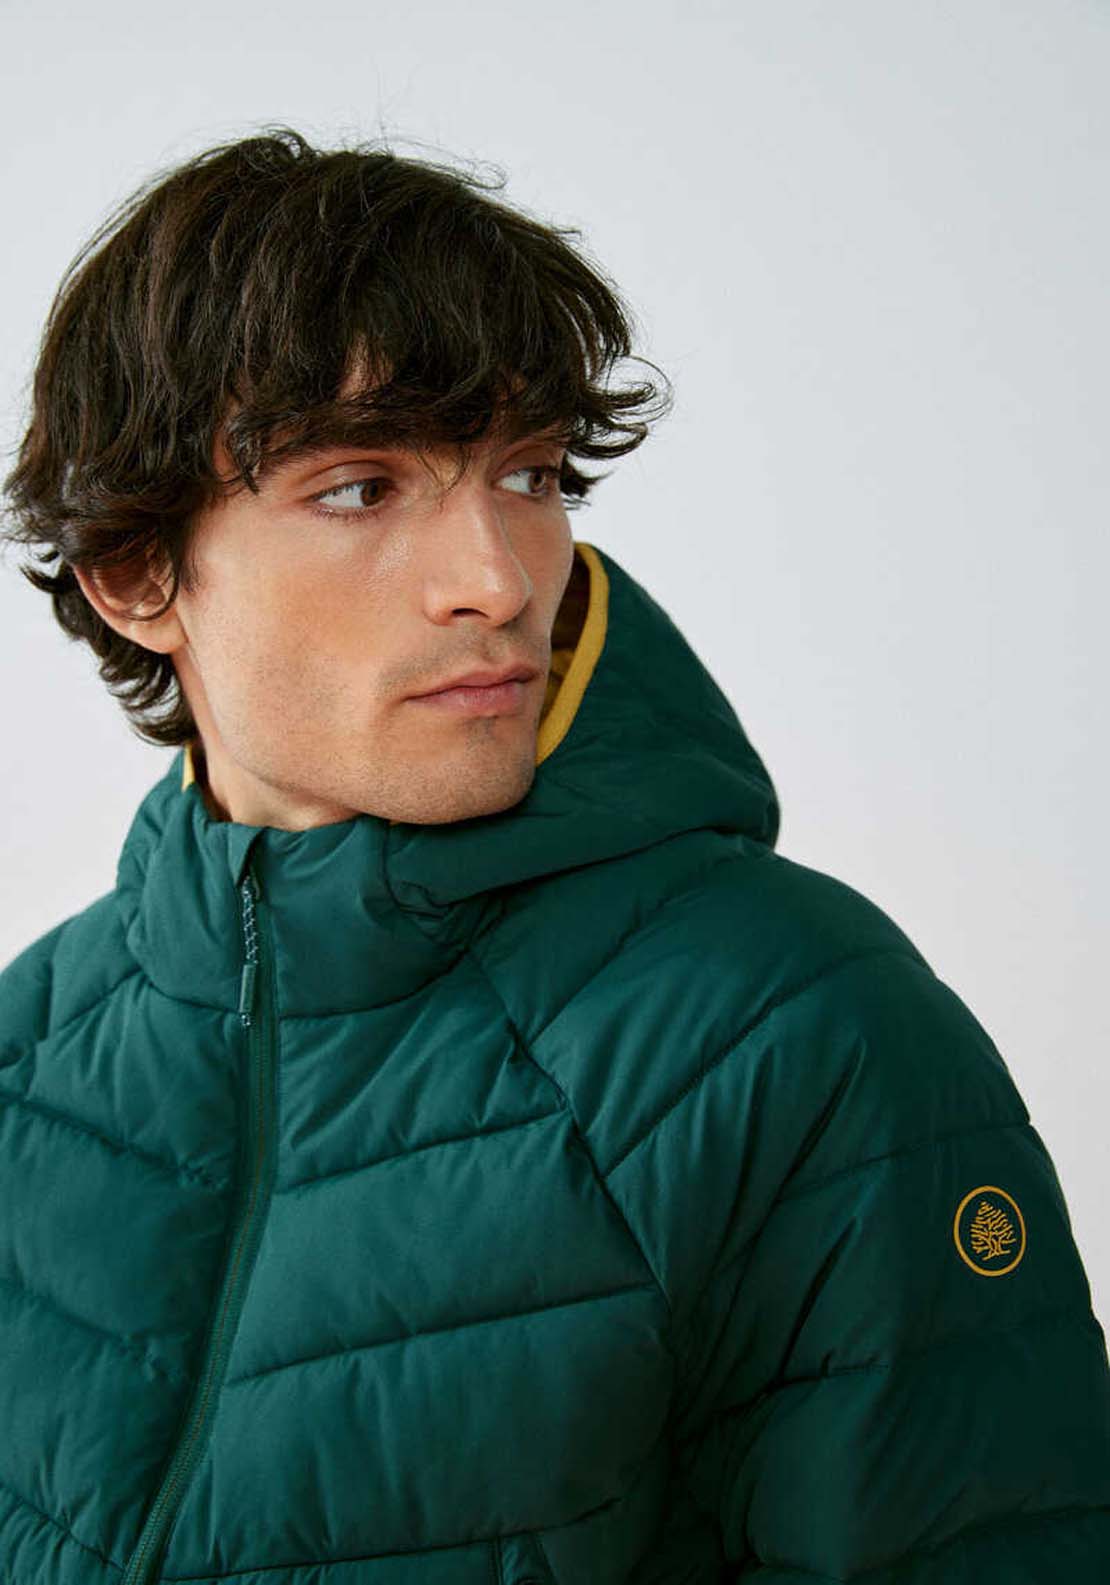 Springfield Padded thermal jacket-Teal - Blue 5 Shaws Department Stores